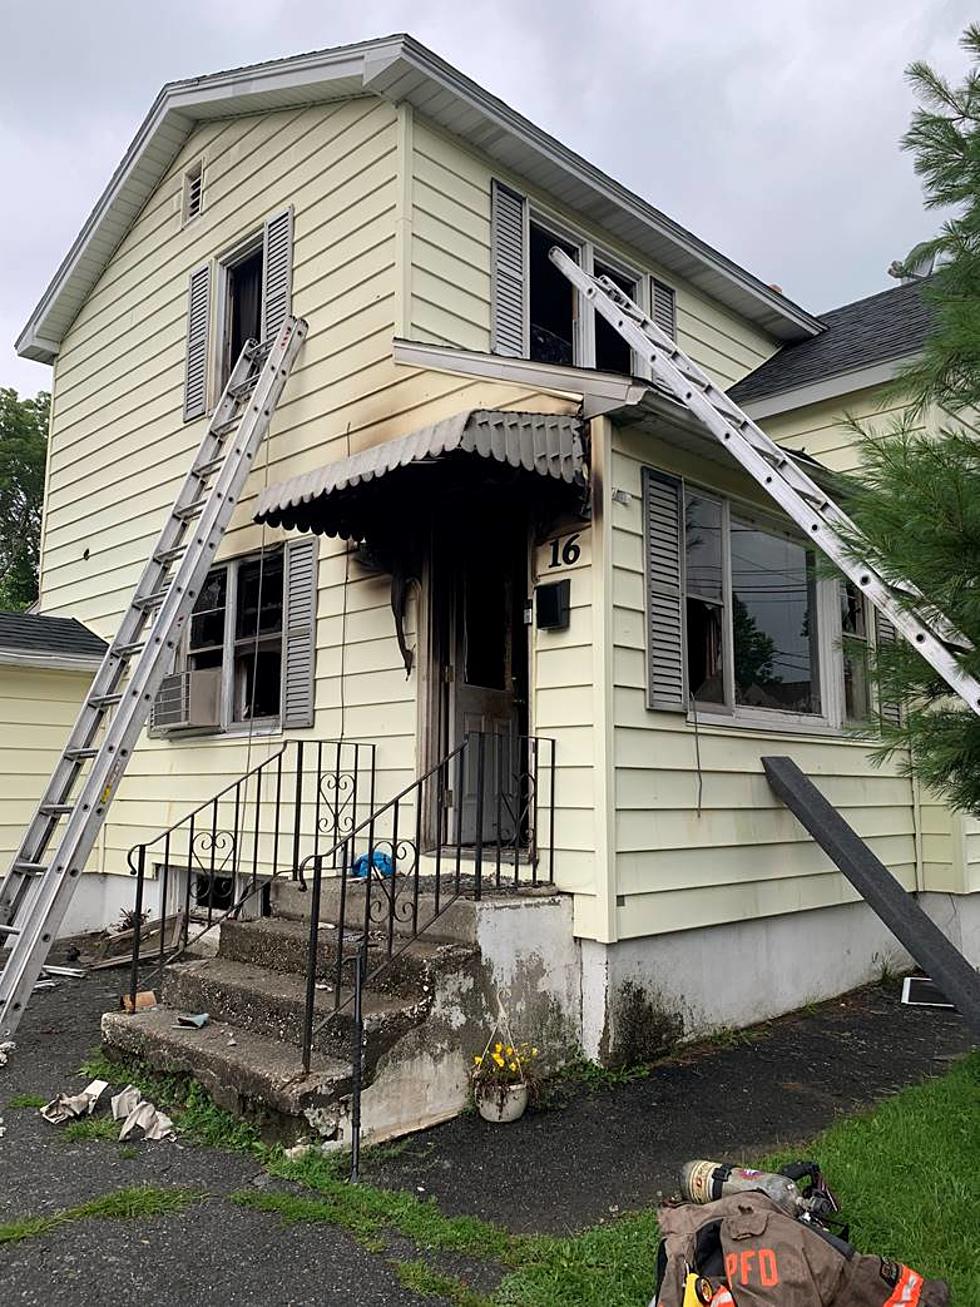 Fire Guts Pittsfield, MA Home, Residents Safe, Family Dog Perished